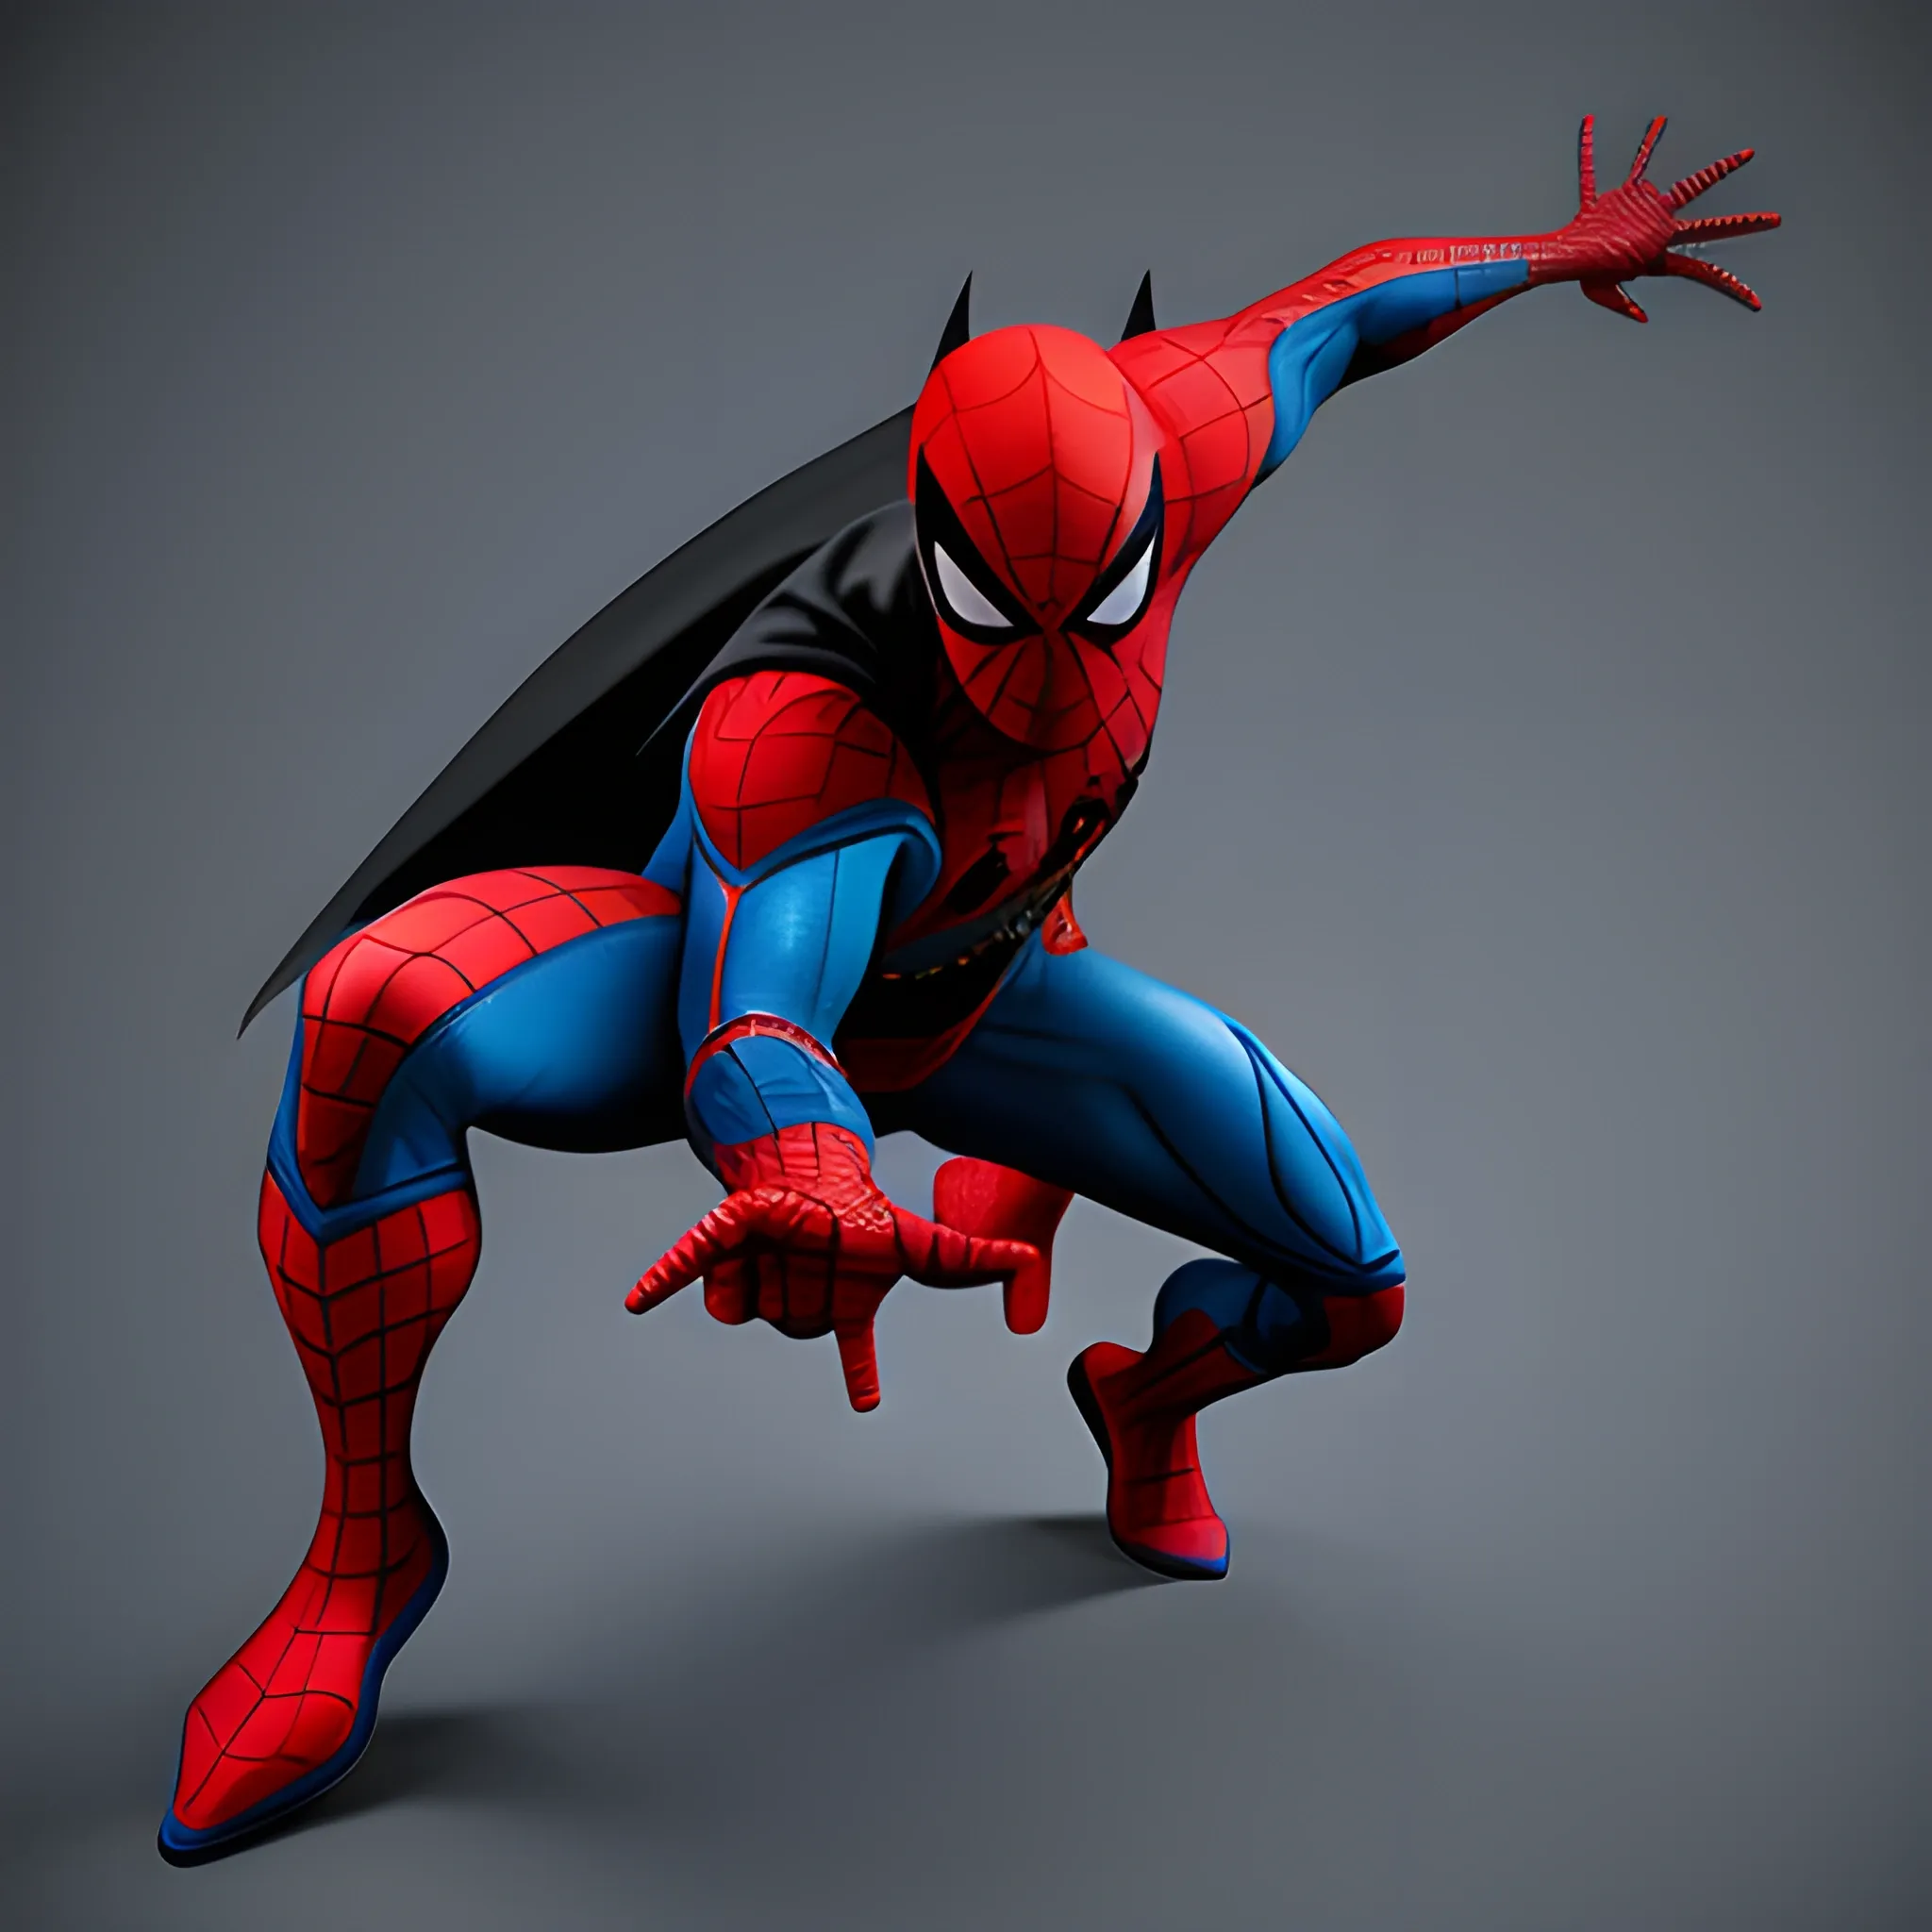 Spider-man! This is a Spider-man pose to go along with the previous Maximum  Venom art. And that's it for all the official Marvel art on... | Instagram